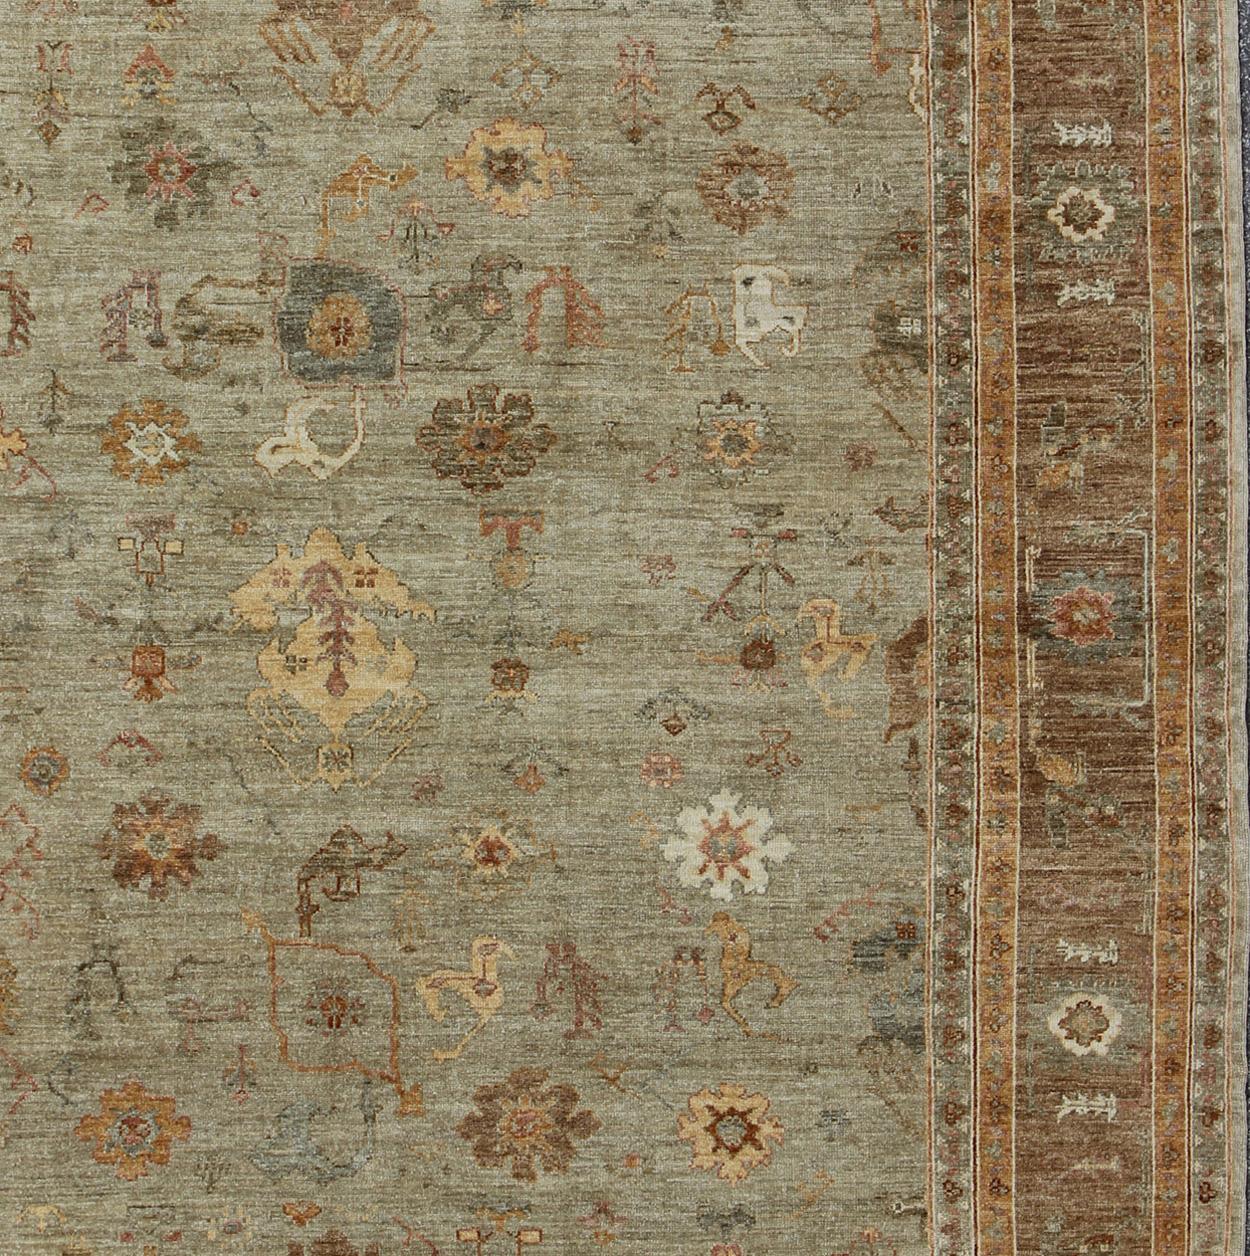 Angora Oushak Turkish rug in warm colors of taupe, green brown, cream, Angora Oushak rug from Turkey, rug AN-126705, country of origin / type: Turkey / Angora Oushak.

Measures: 11'4 x 14

This beautiful neutral color Oushak is made with a